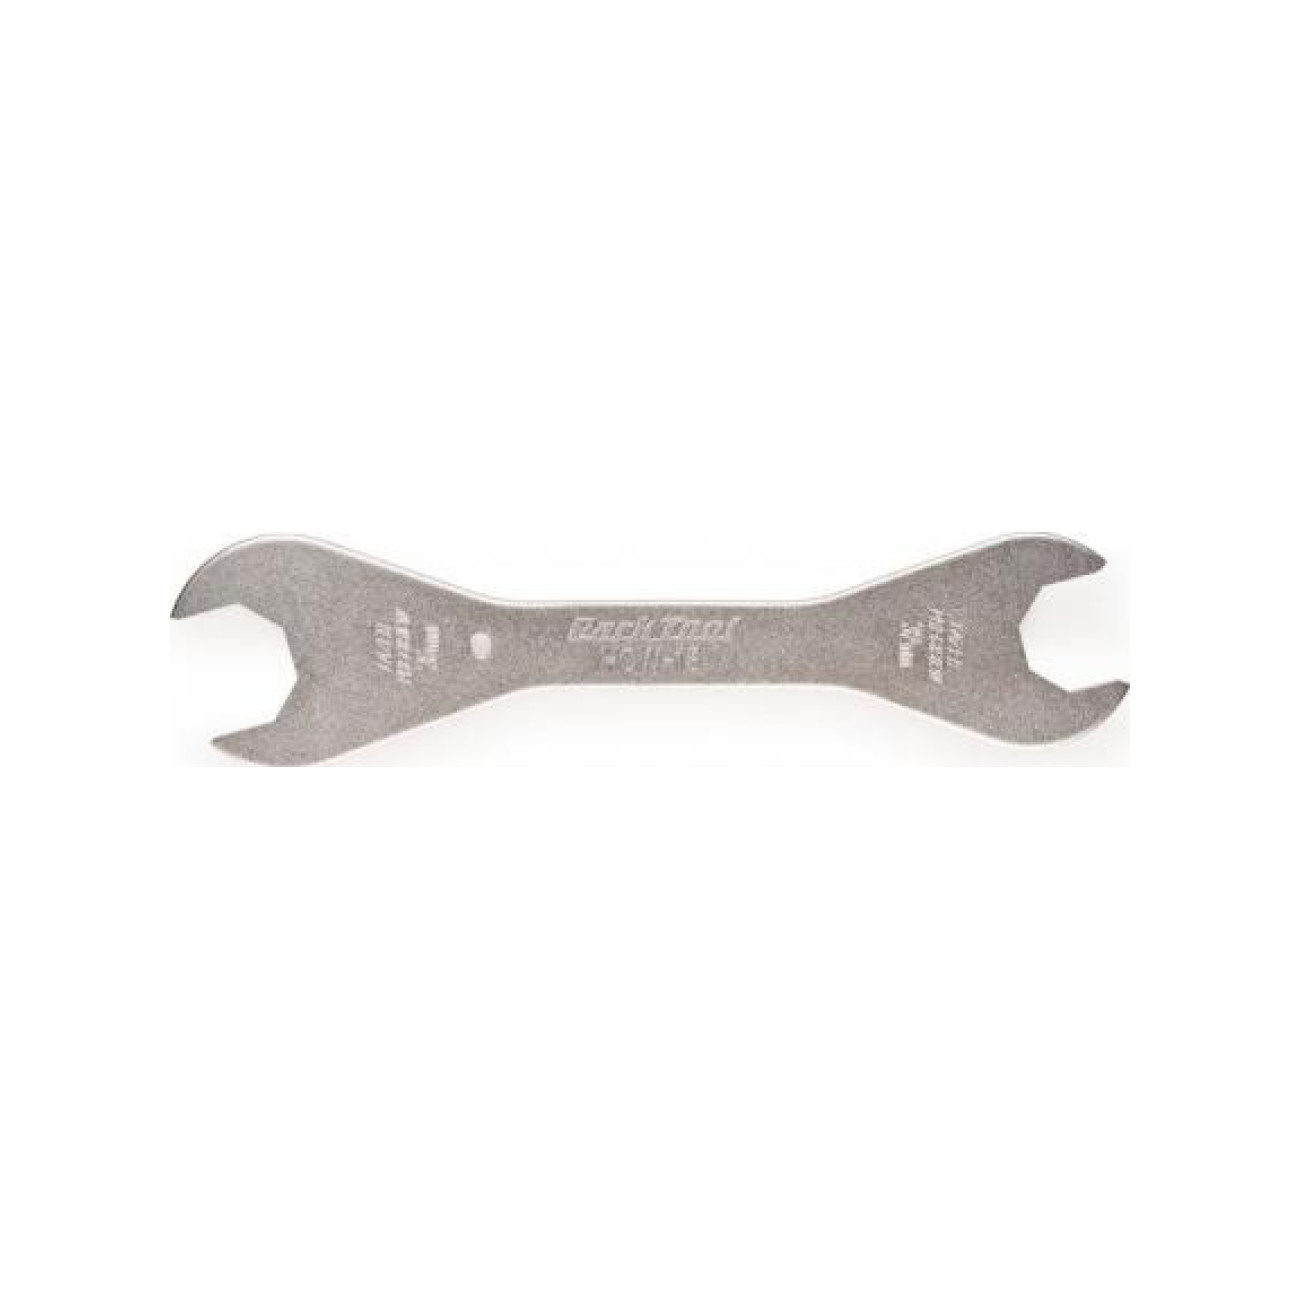 PARK TOOL Kulcs - WRENCH 32 - 36 Mm PT-HCW-15 - Ezüst